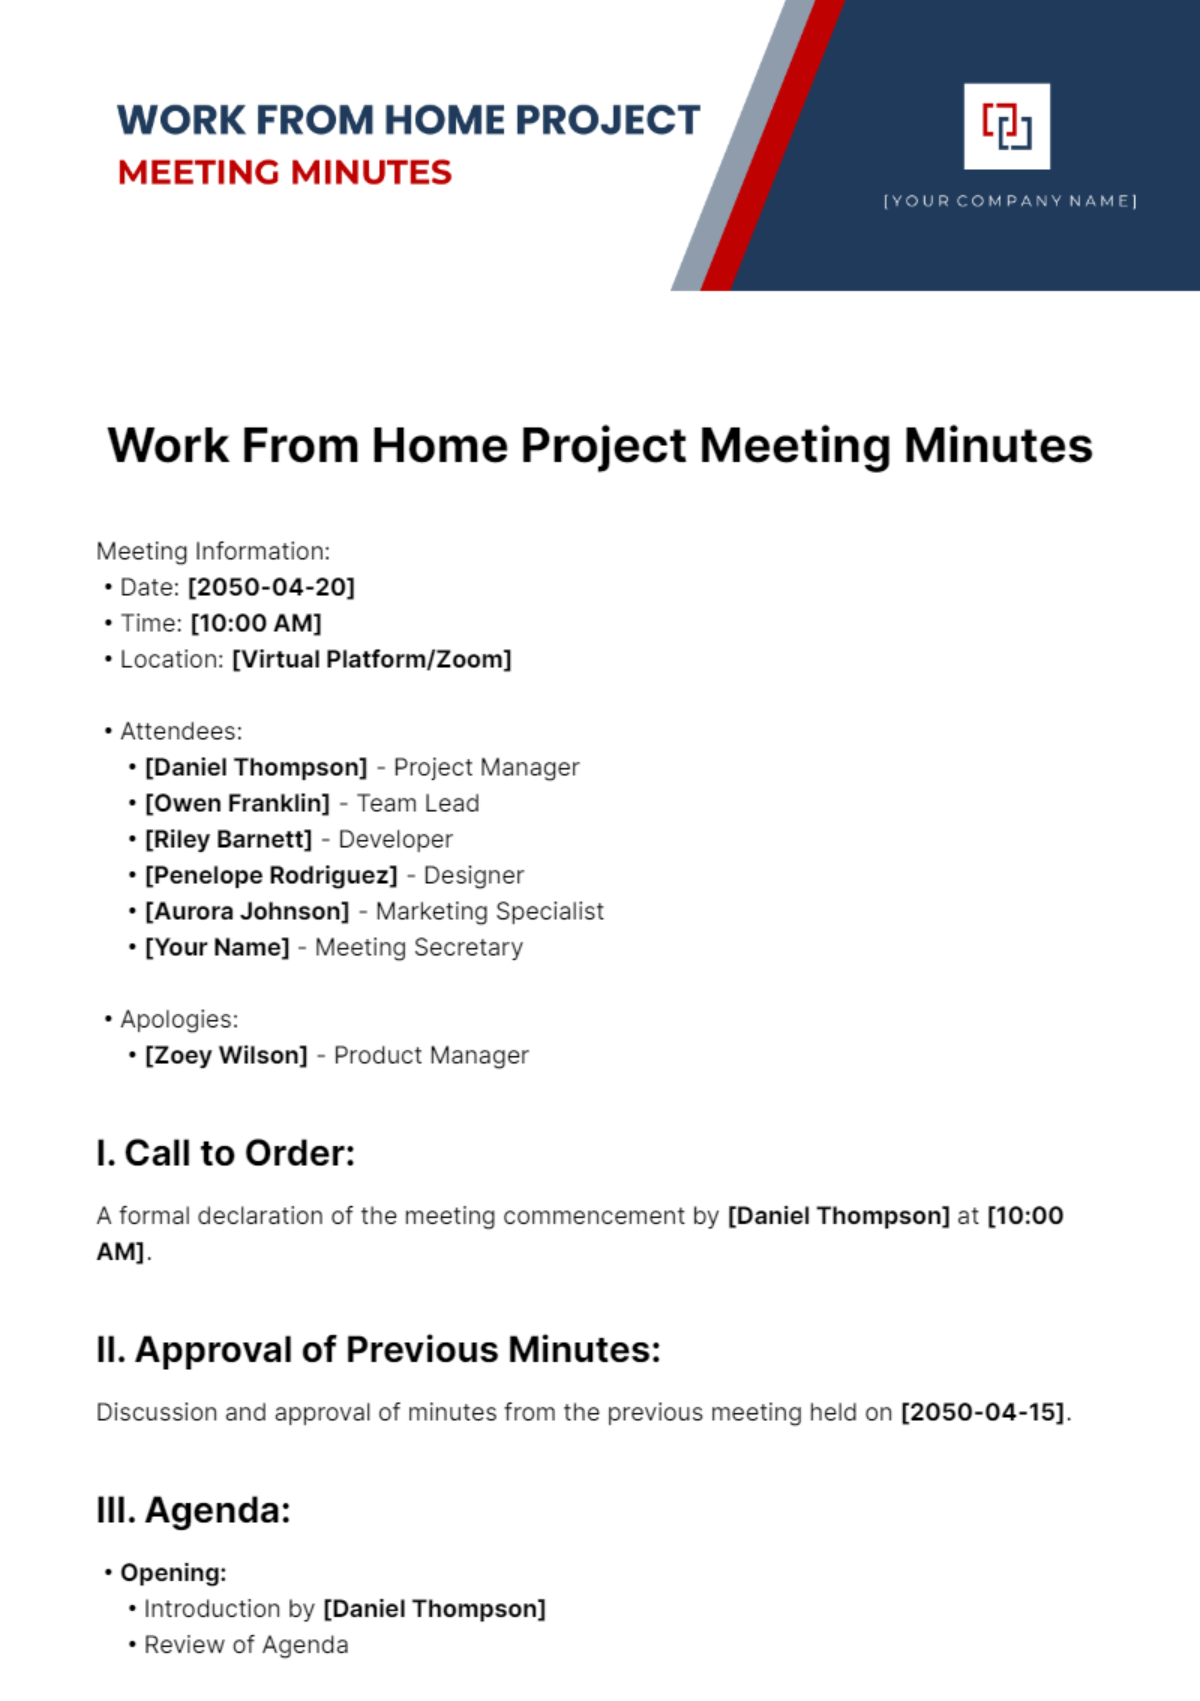 Work From Home Project Meeting Minutes Template